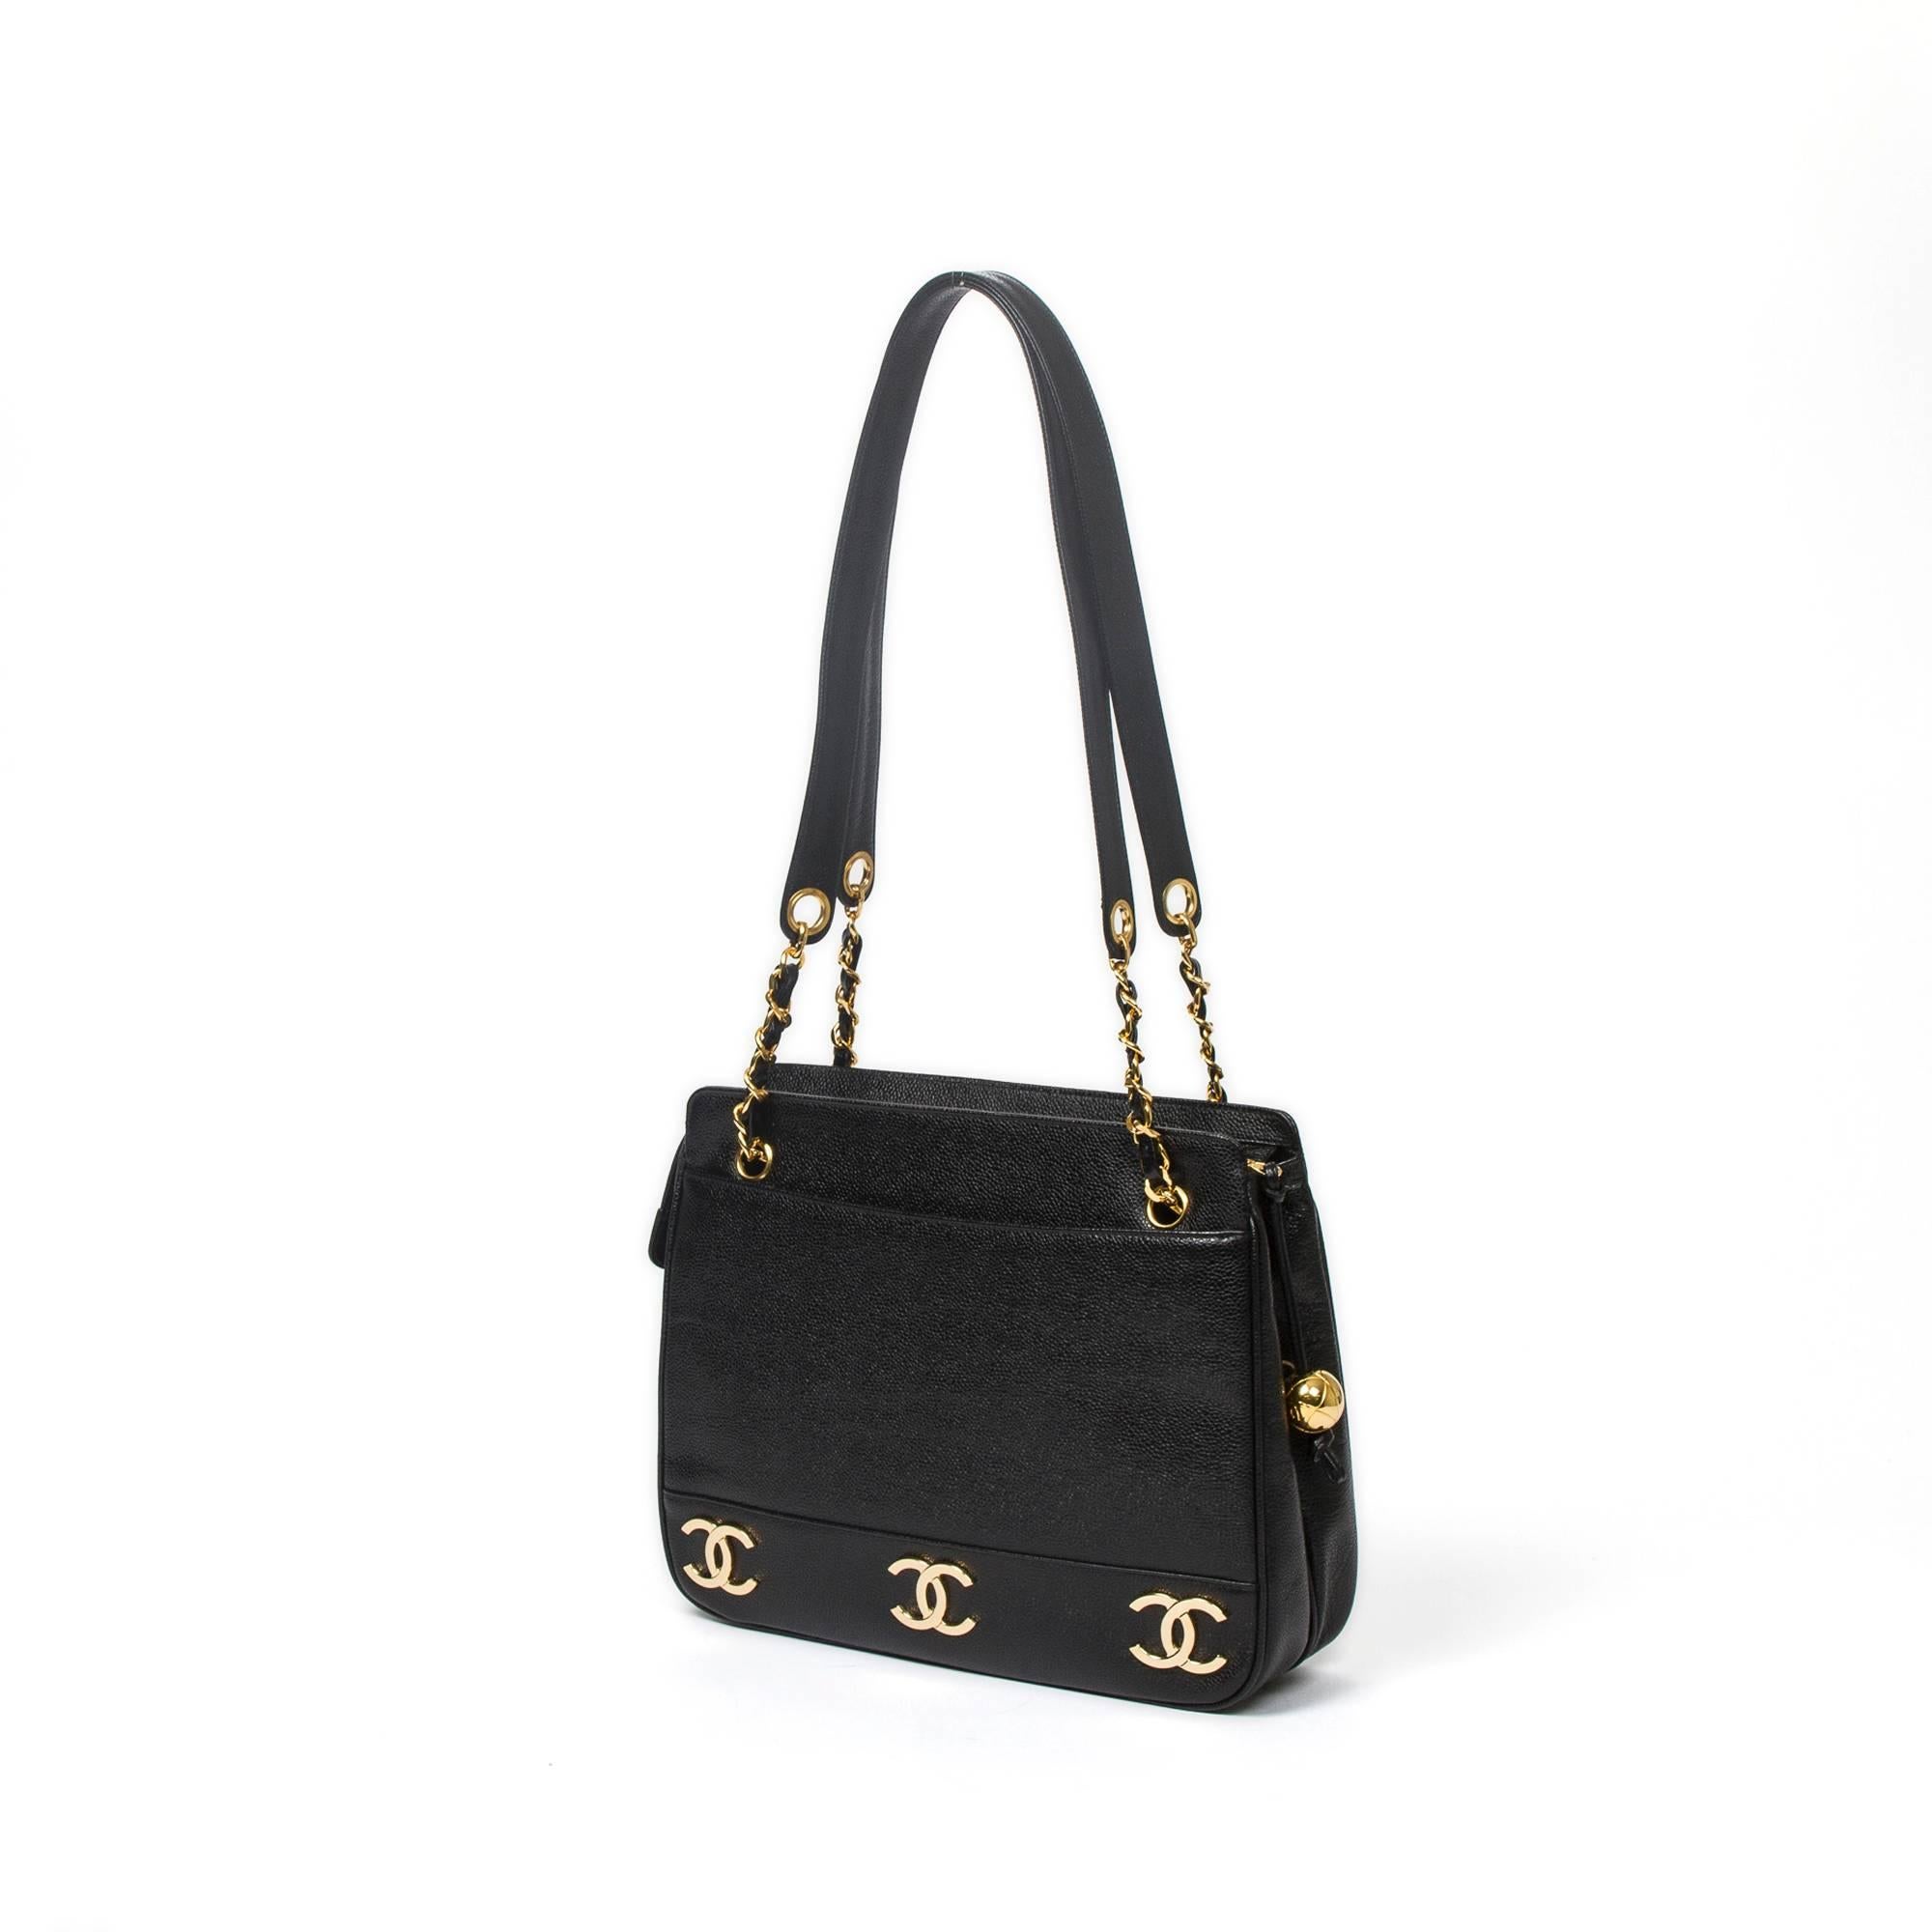 Chanel Vintage Tote bag 31cm in black	grained leather with chain and leather straps, gold tone hardware. Top zipper closure with gold tone sphere pendant zipper toggle. Black leather lined interior. Tag, authentication card, dustbag, box, booklet